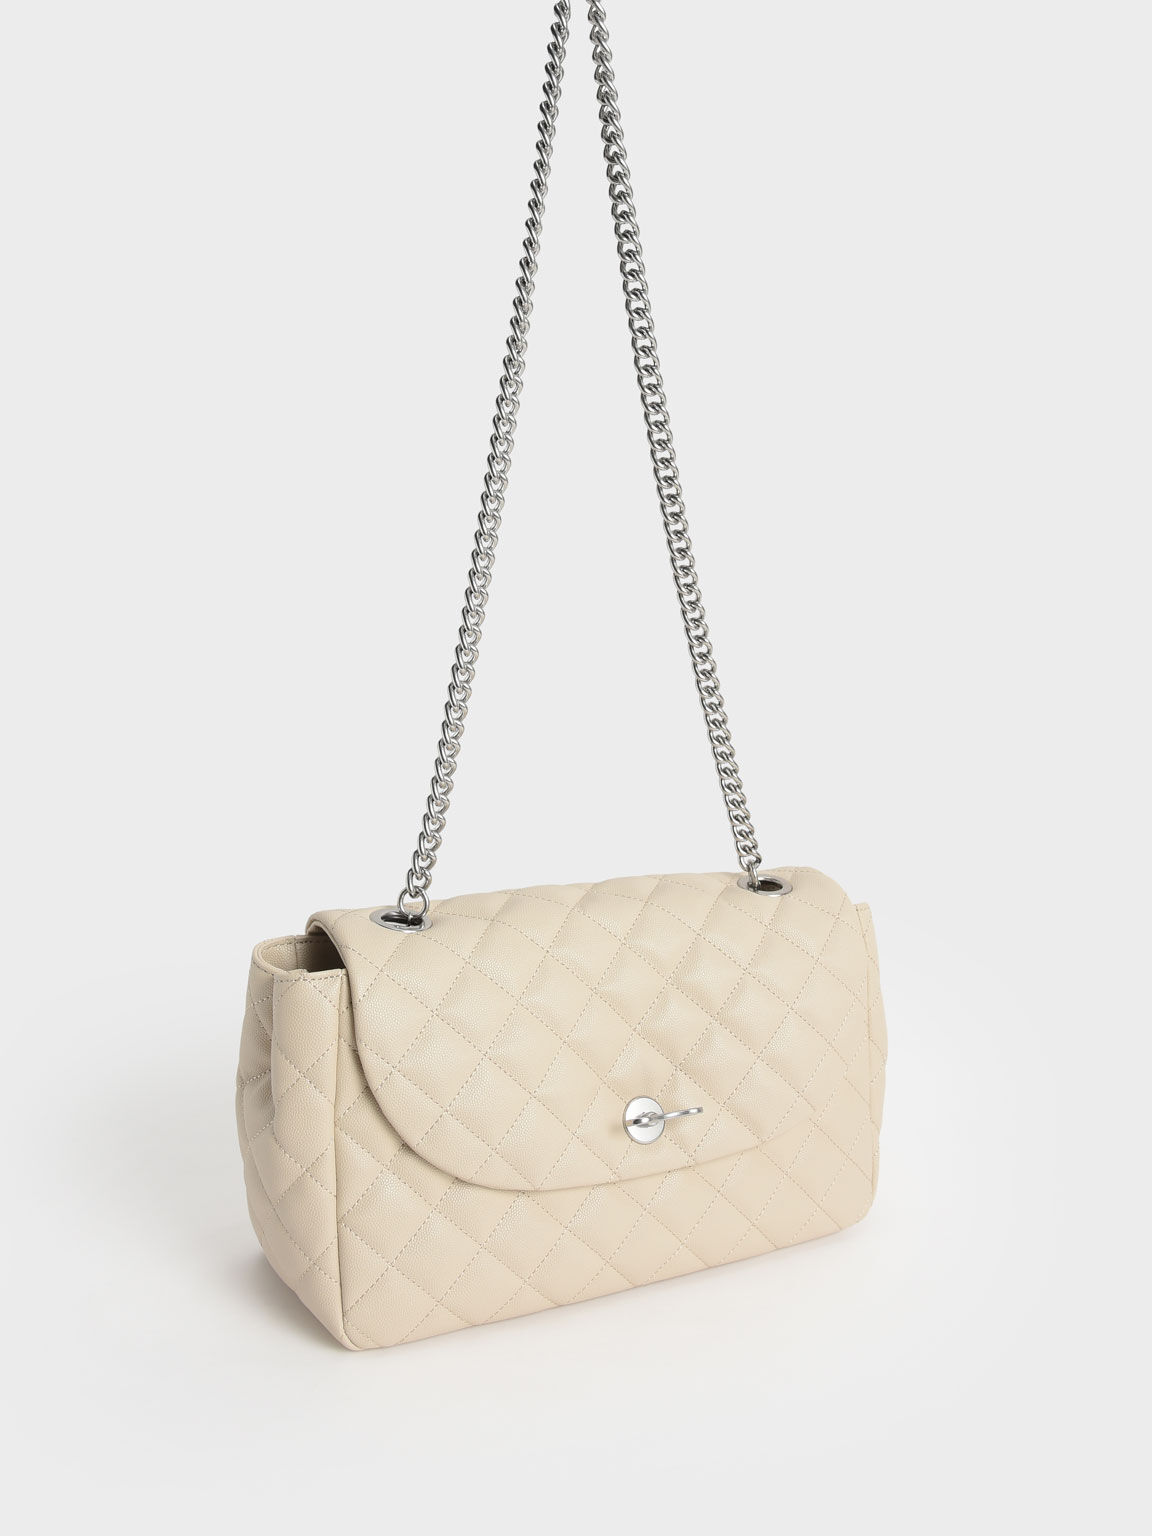 Chain Link Quilted Top Handle Bag, Cream, hi-res